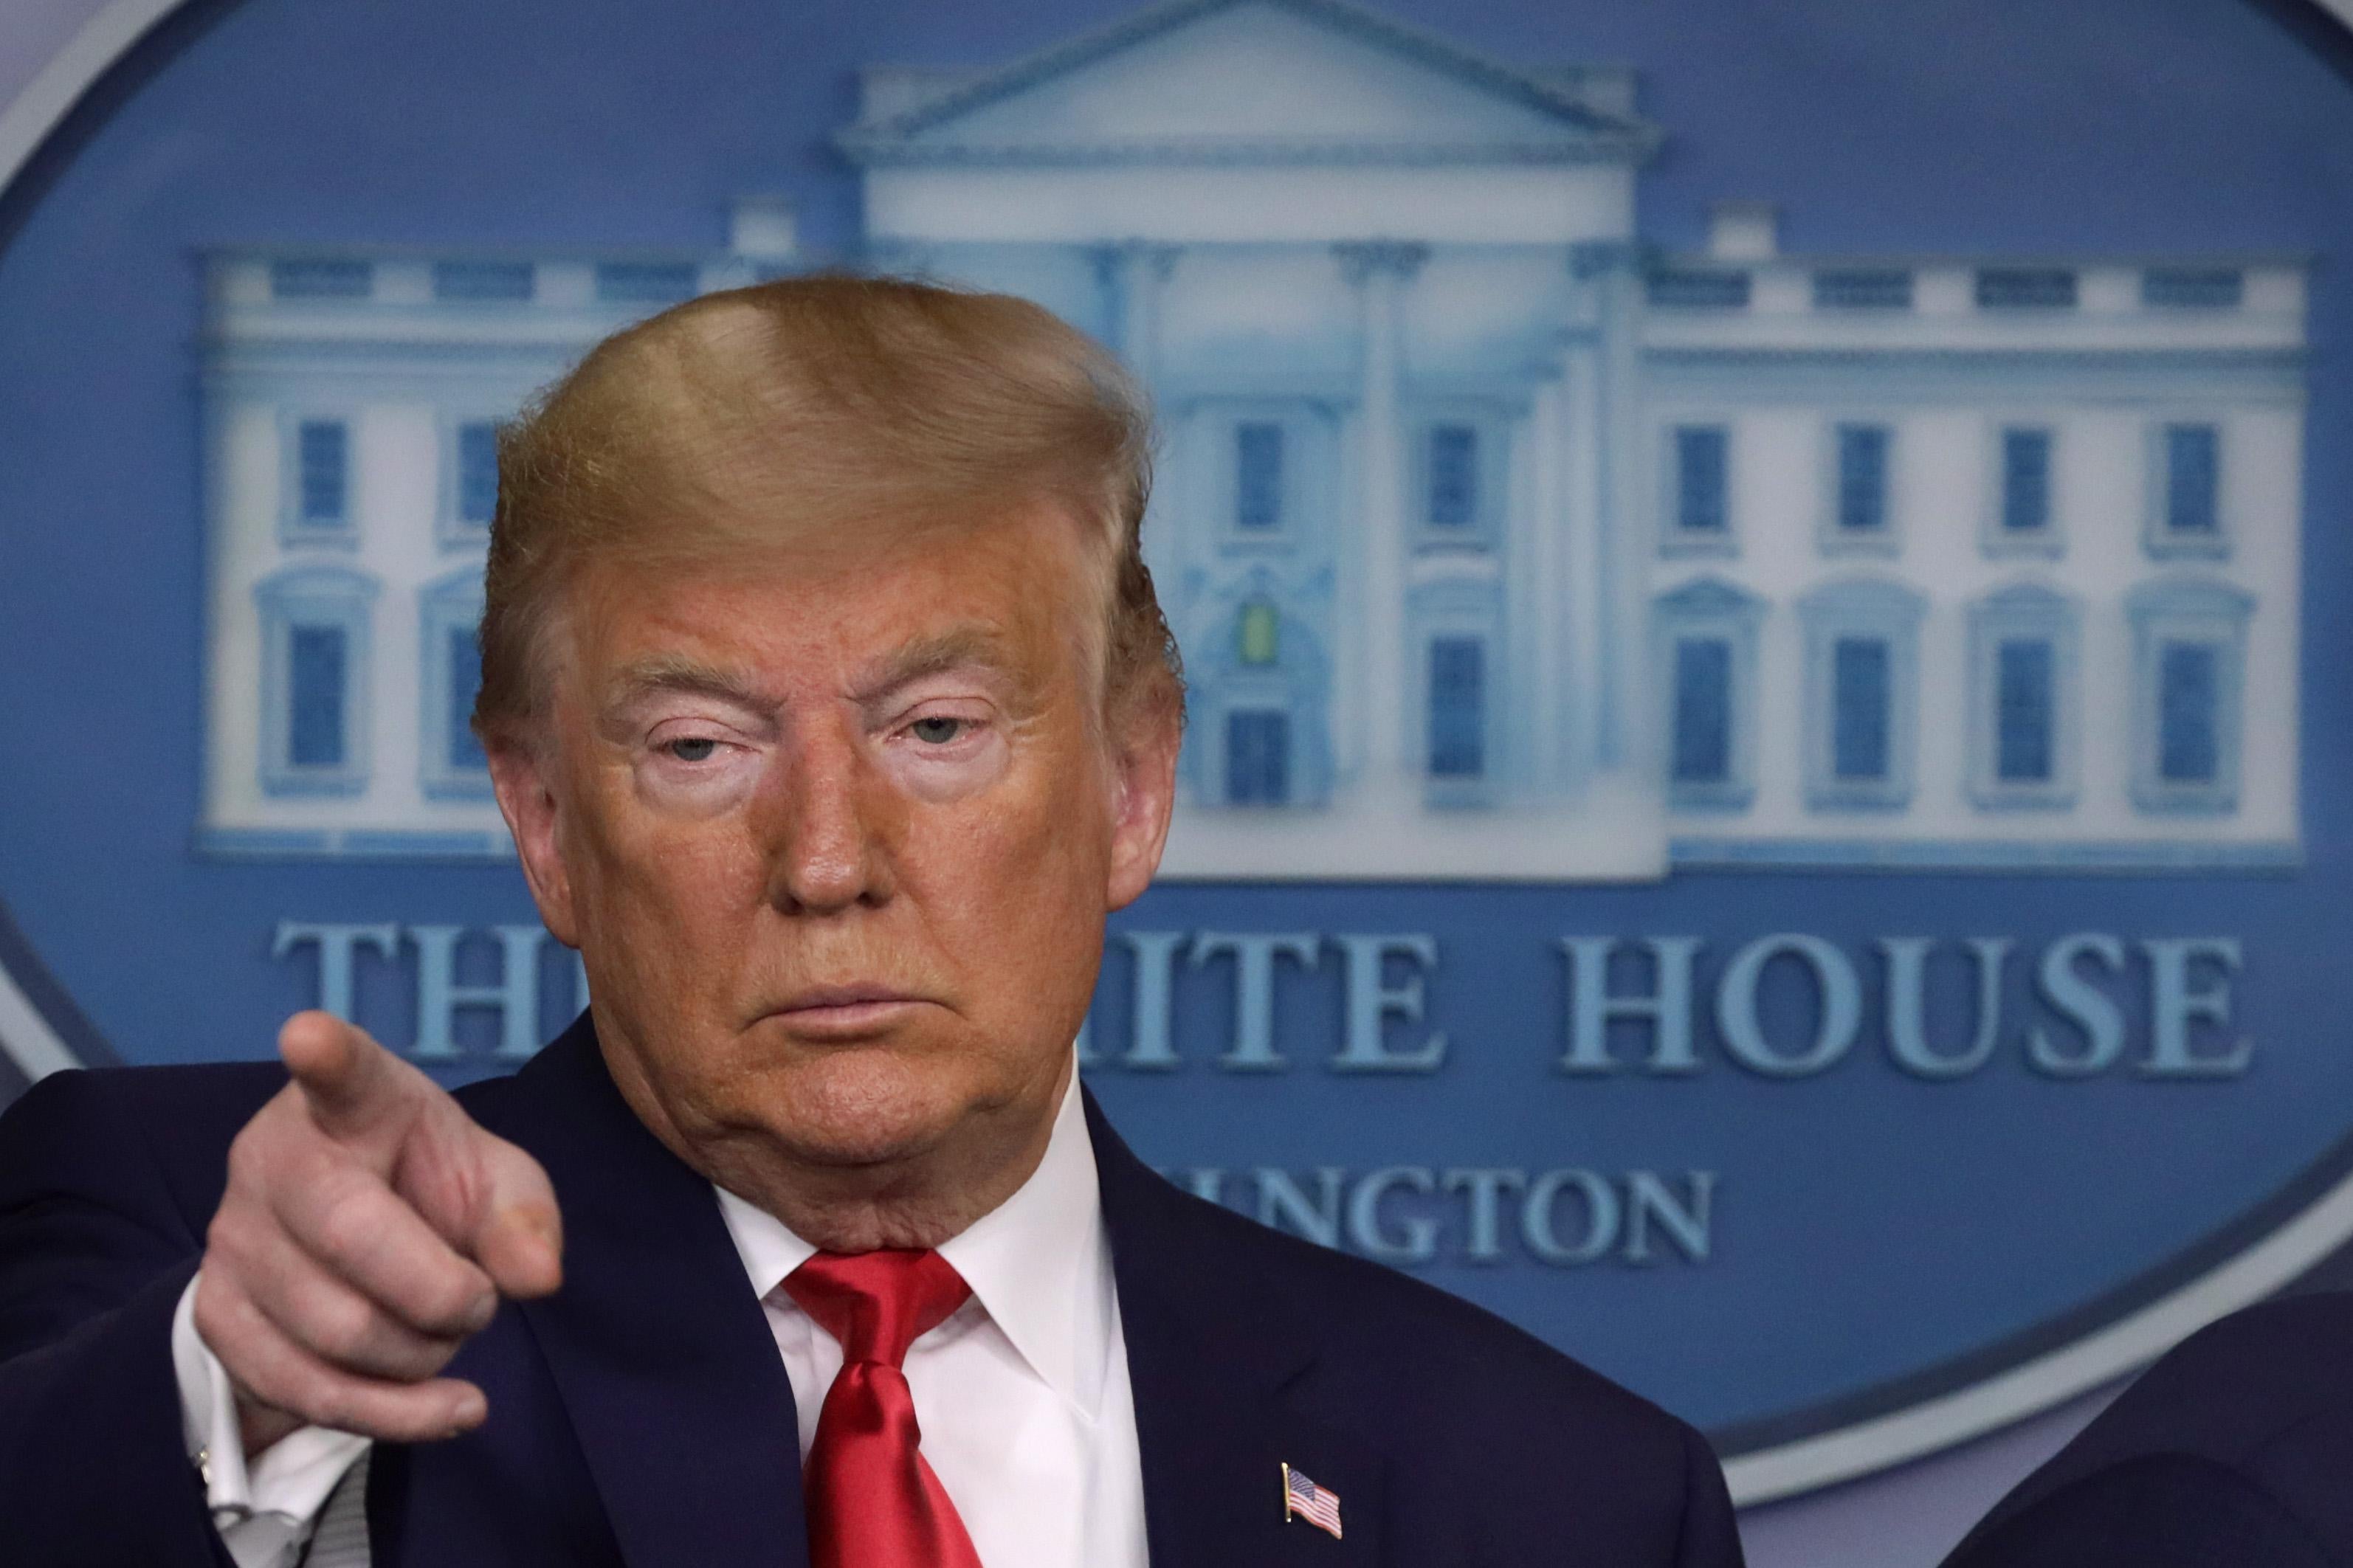 President Donald Trump takes questions during a news conference at the White House February 29, 2020 in Washington, D.C.